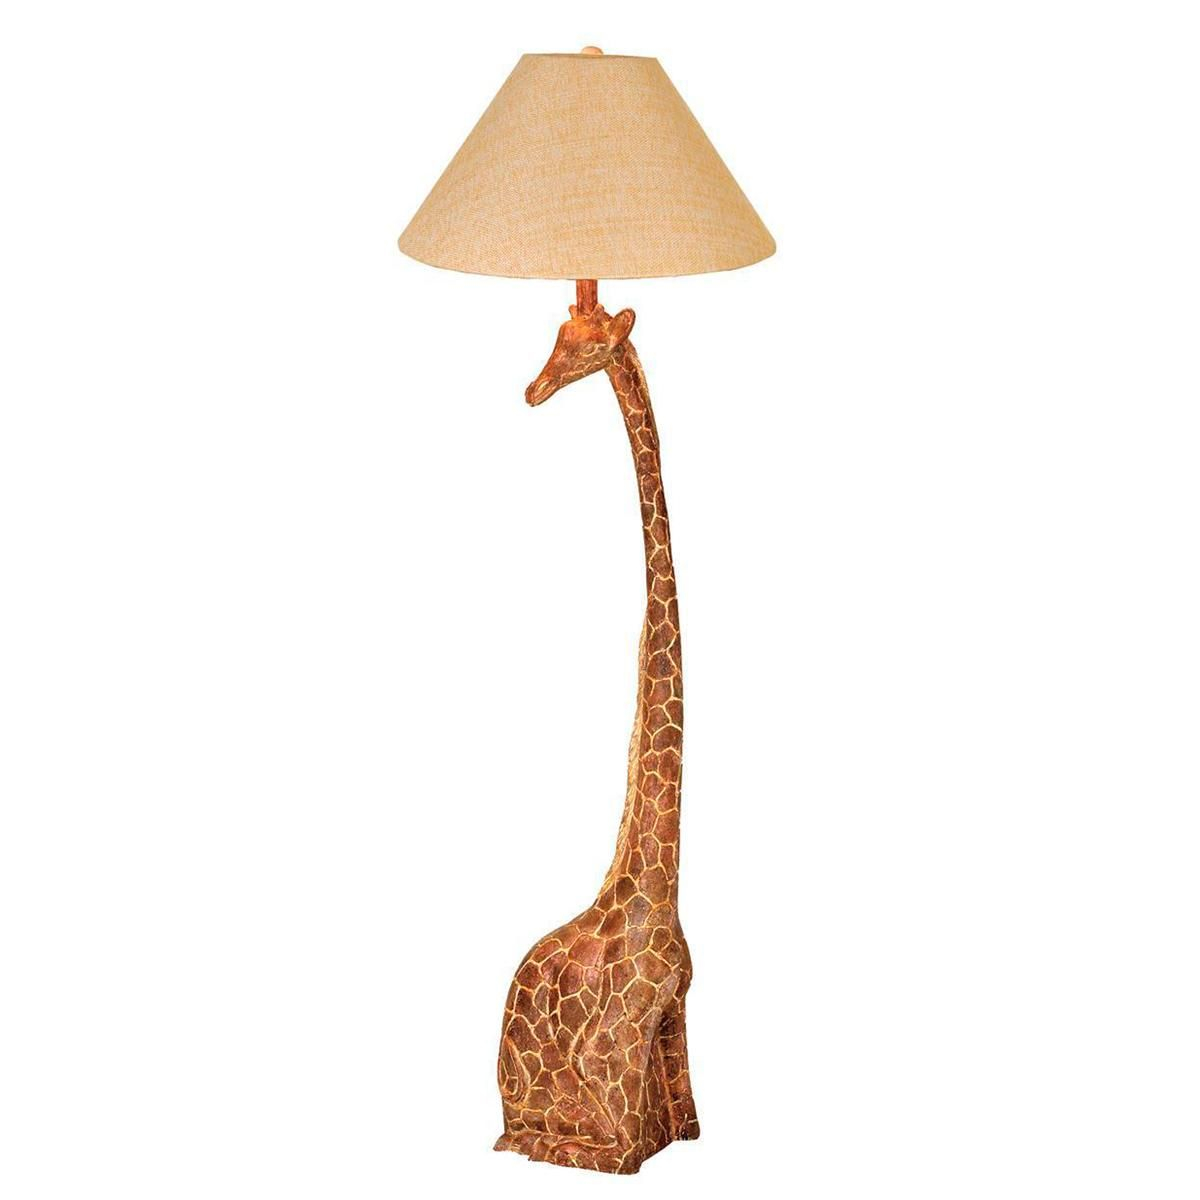 Giraffe Floor Lamp Cute For Nursery Bedroom Lamps Cool throughout proportions 1200 X 1200